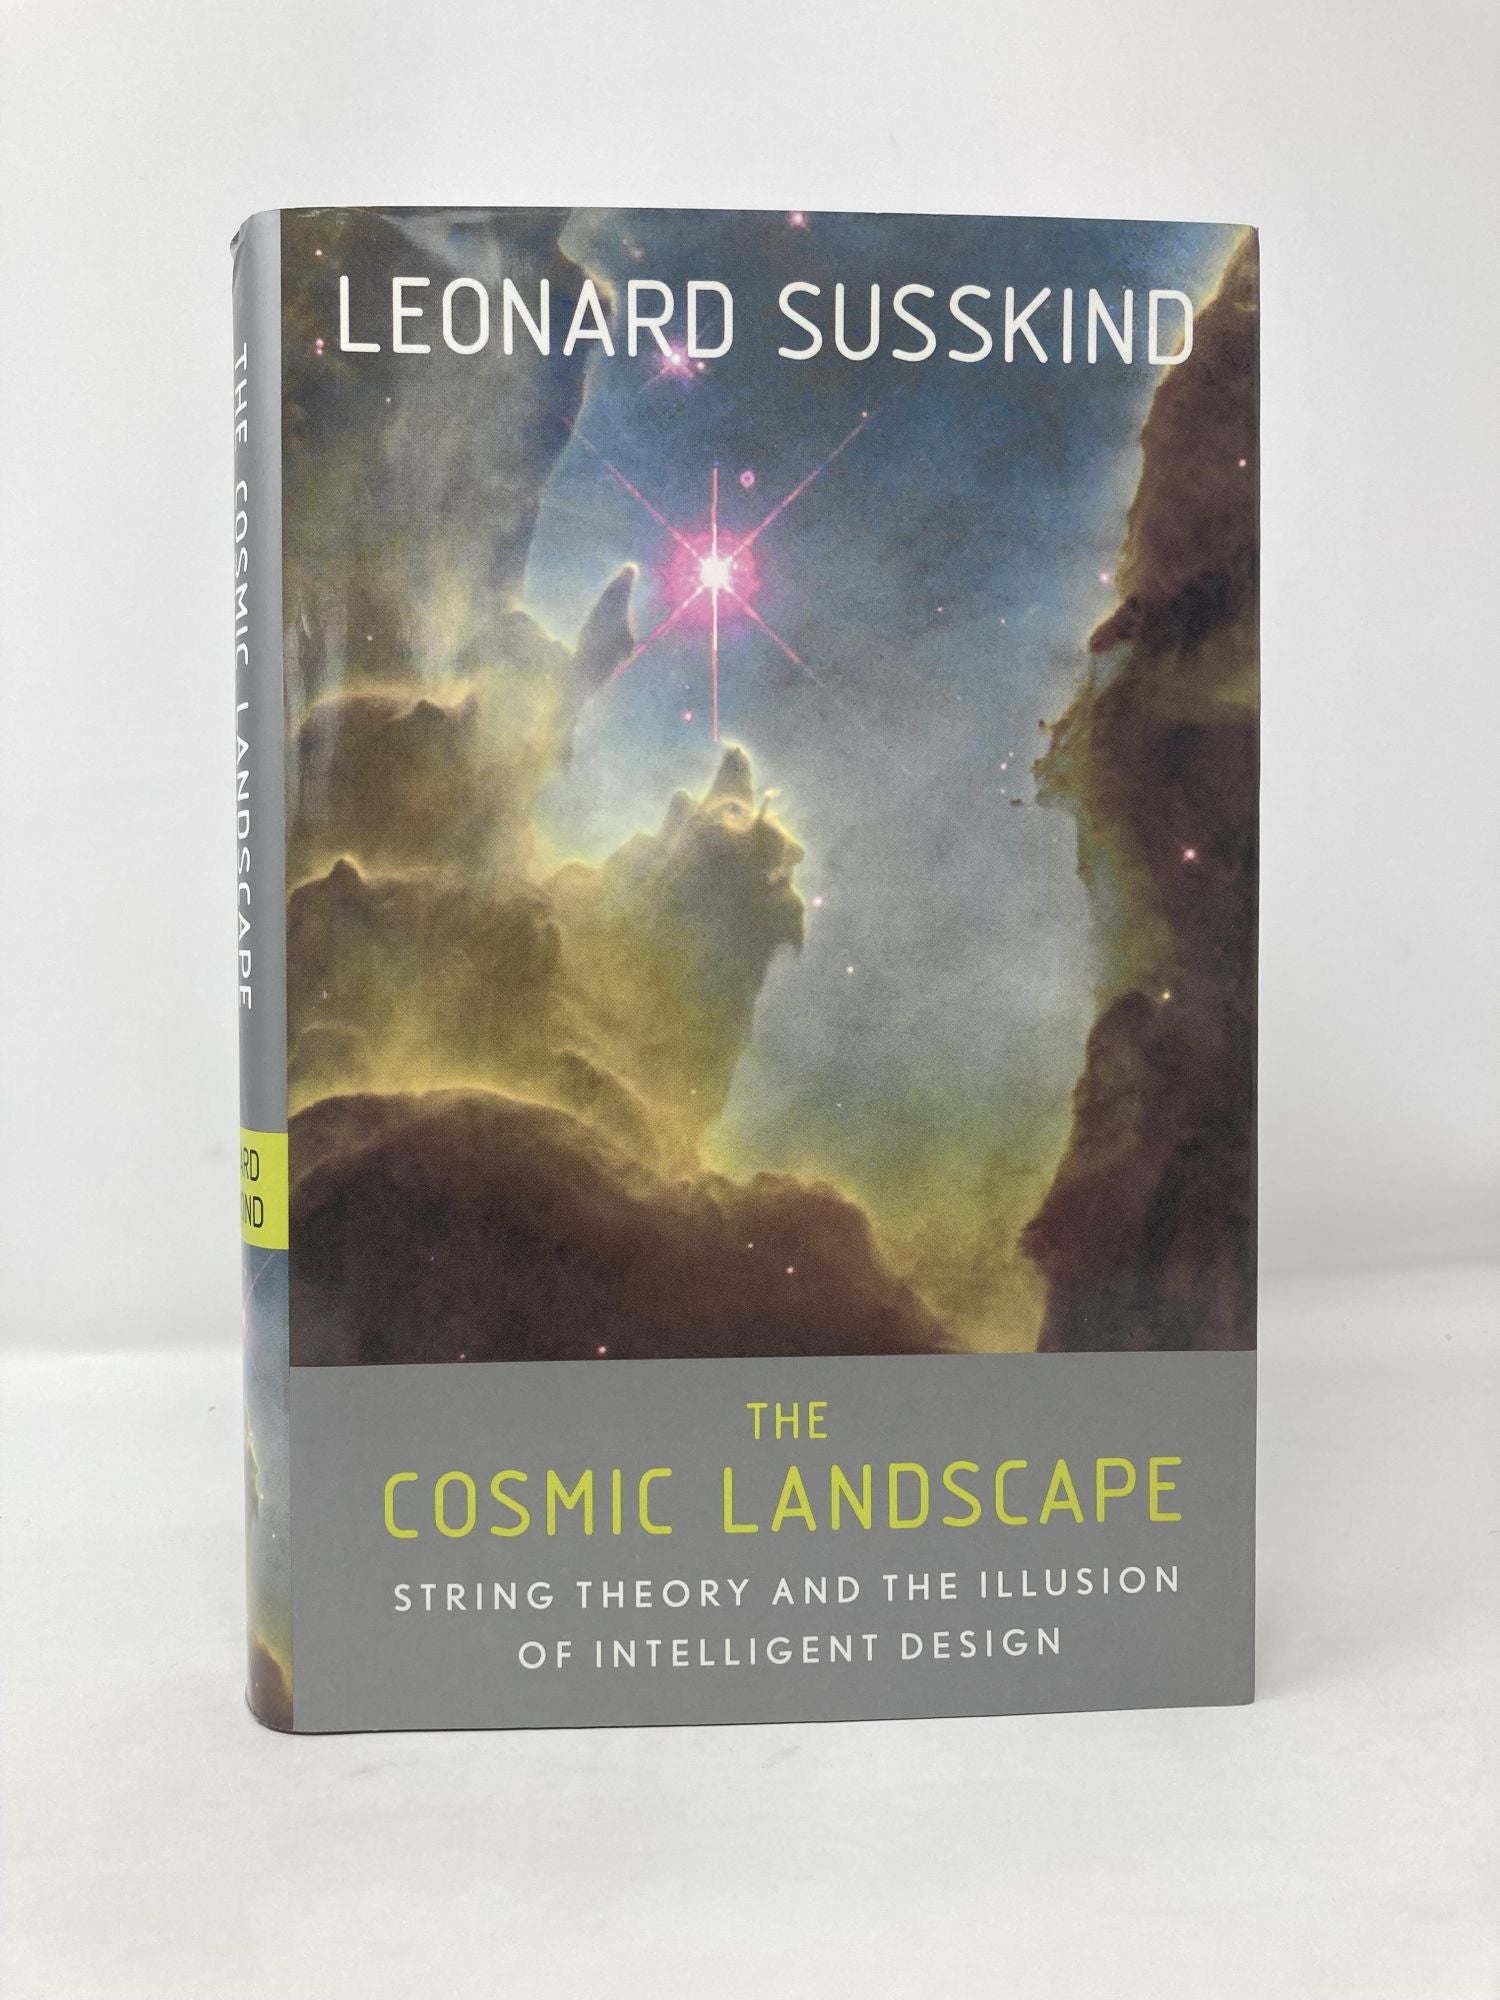 The Cosmic Landscape: String Theory and the Illusion of Intelligent Design  by Leonard Susskind on Sag Harbor Books